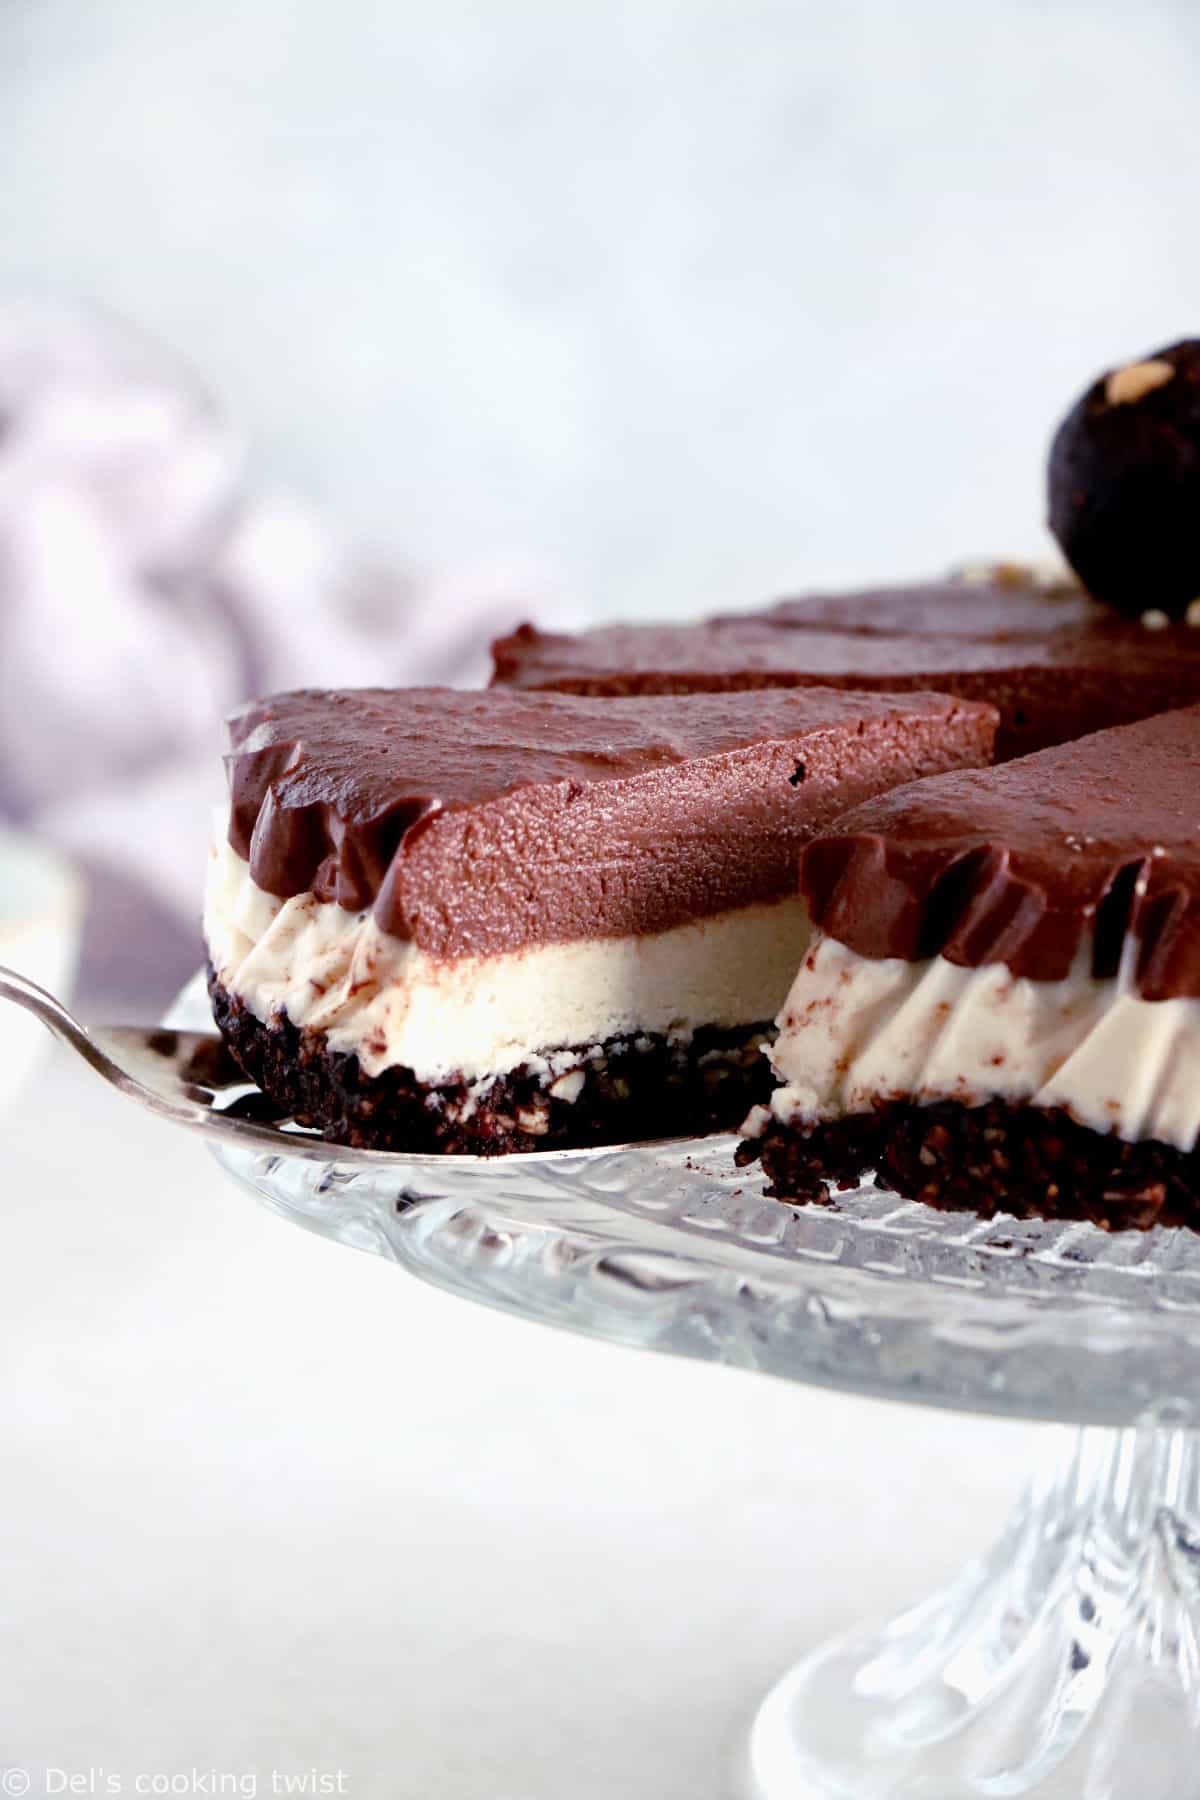 No-bake vegan chocolate cashew cheesecake is a dream come true. This healthy vegan dessert recipe has a rich chocolate filling and a crunchy nut base.